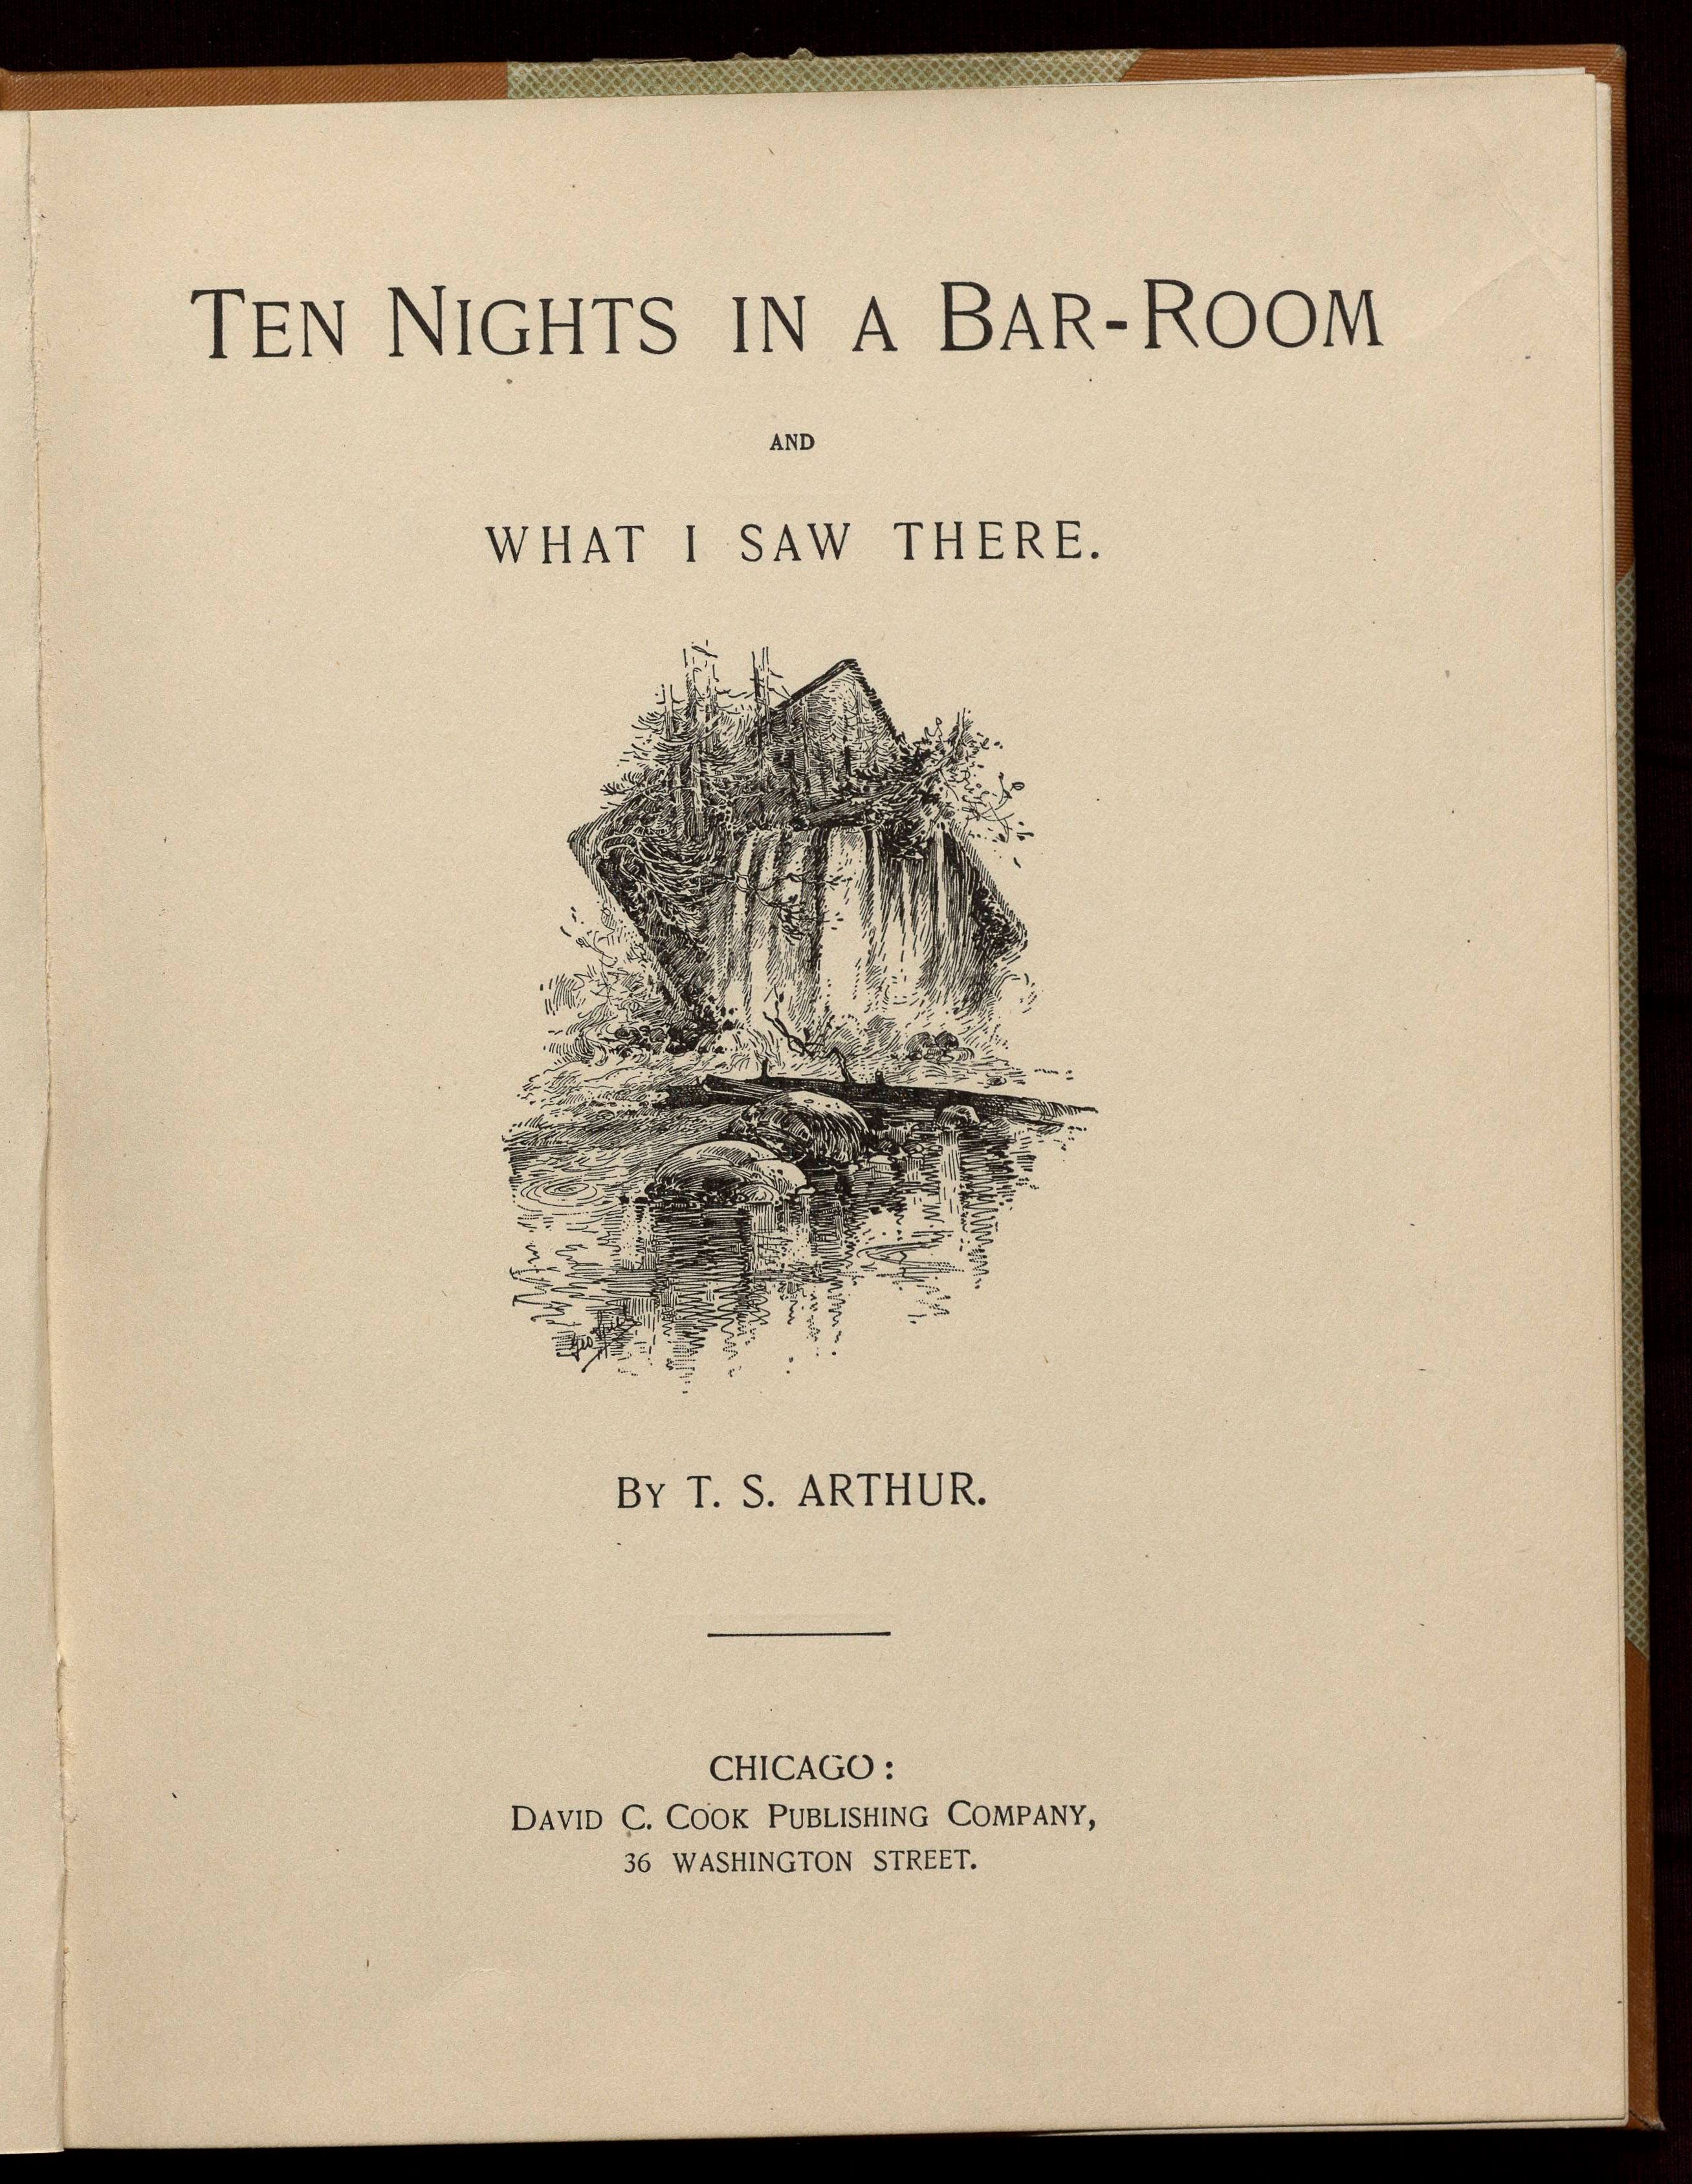 Ten nights in a bar-room and what I saw there, 1898, © Material sourced from the University of Michigan